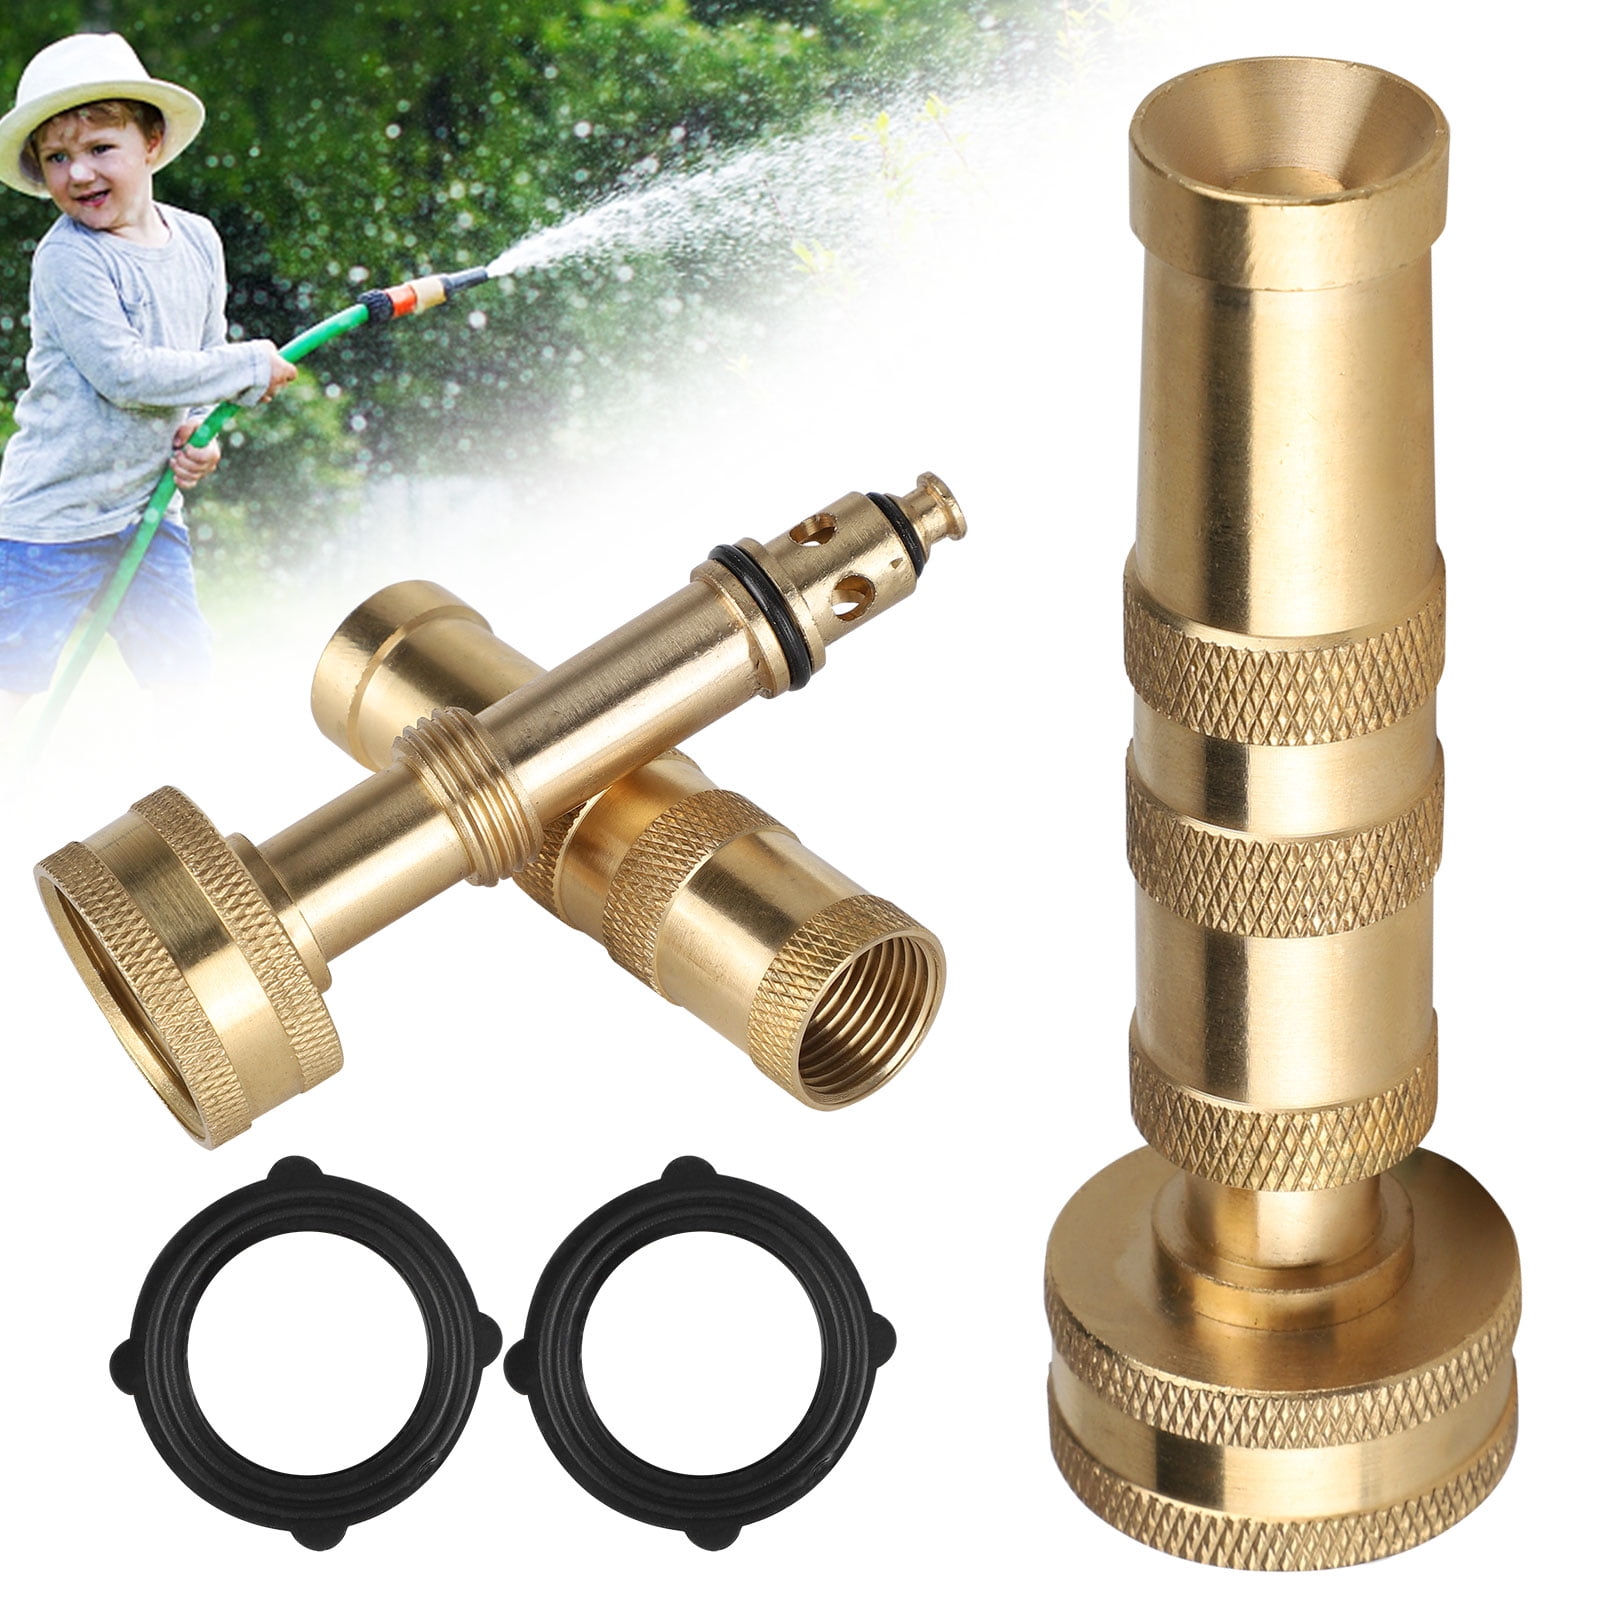 Solid Brass Fittings Made USA Water Hose Nozzle High Pressure For Car Garden 